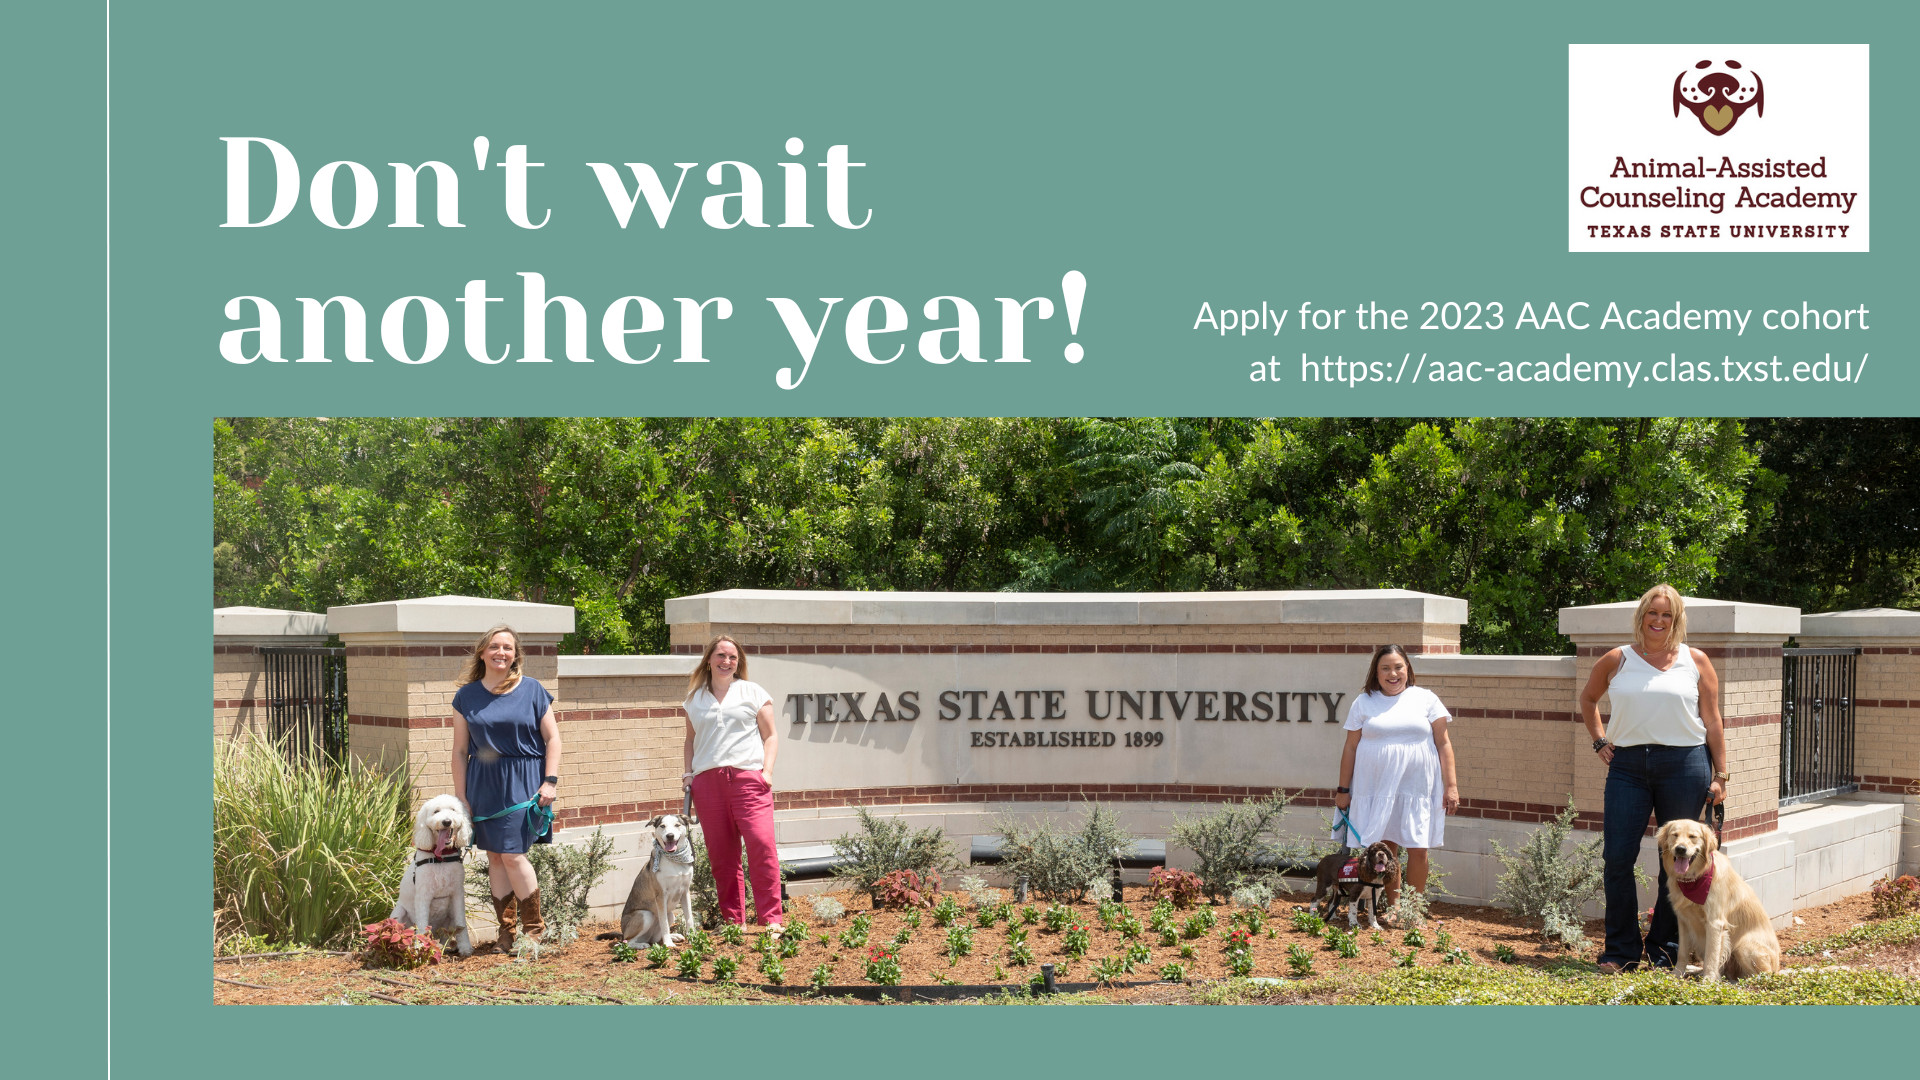 Animal-Assisted Counseling Academy : Texas State University